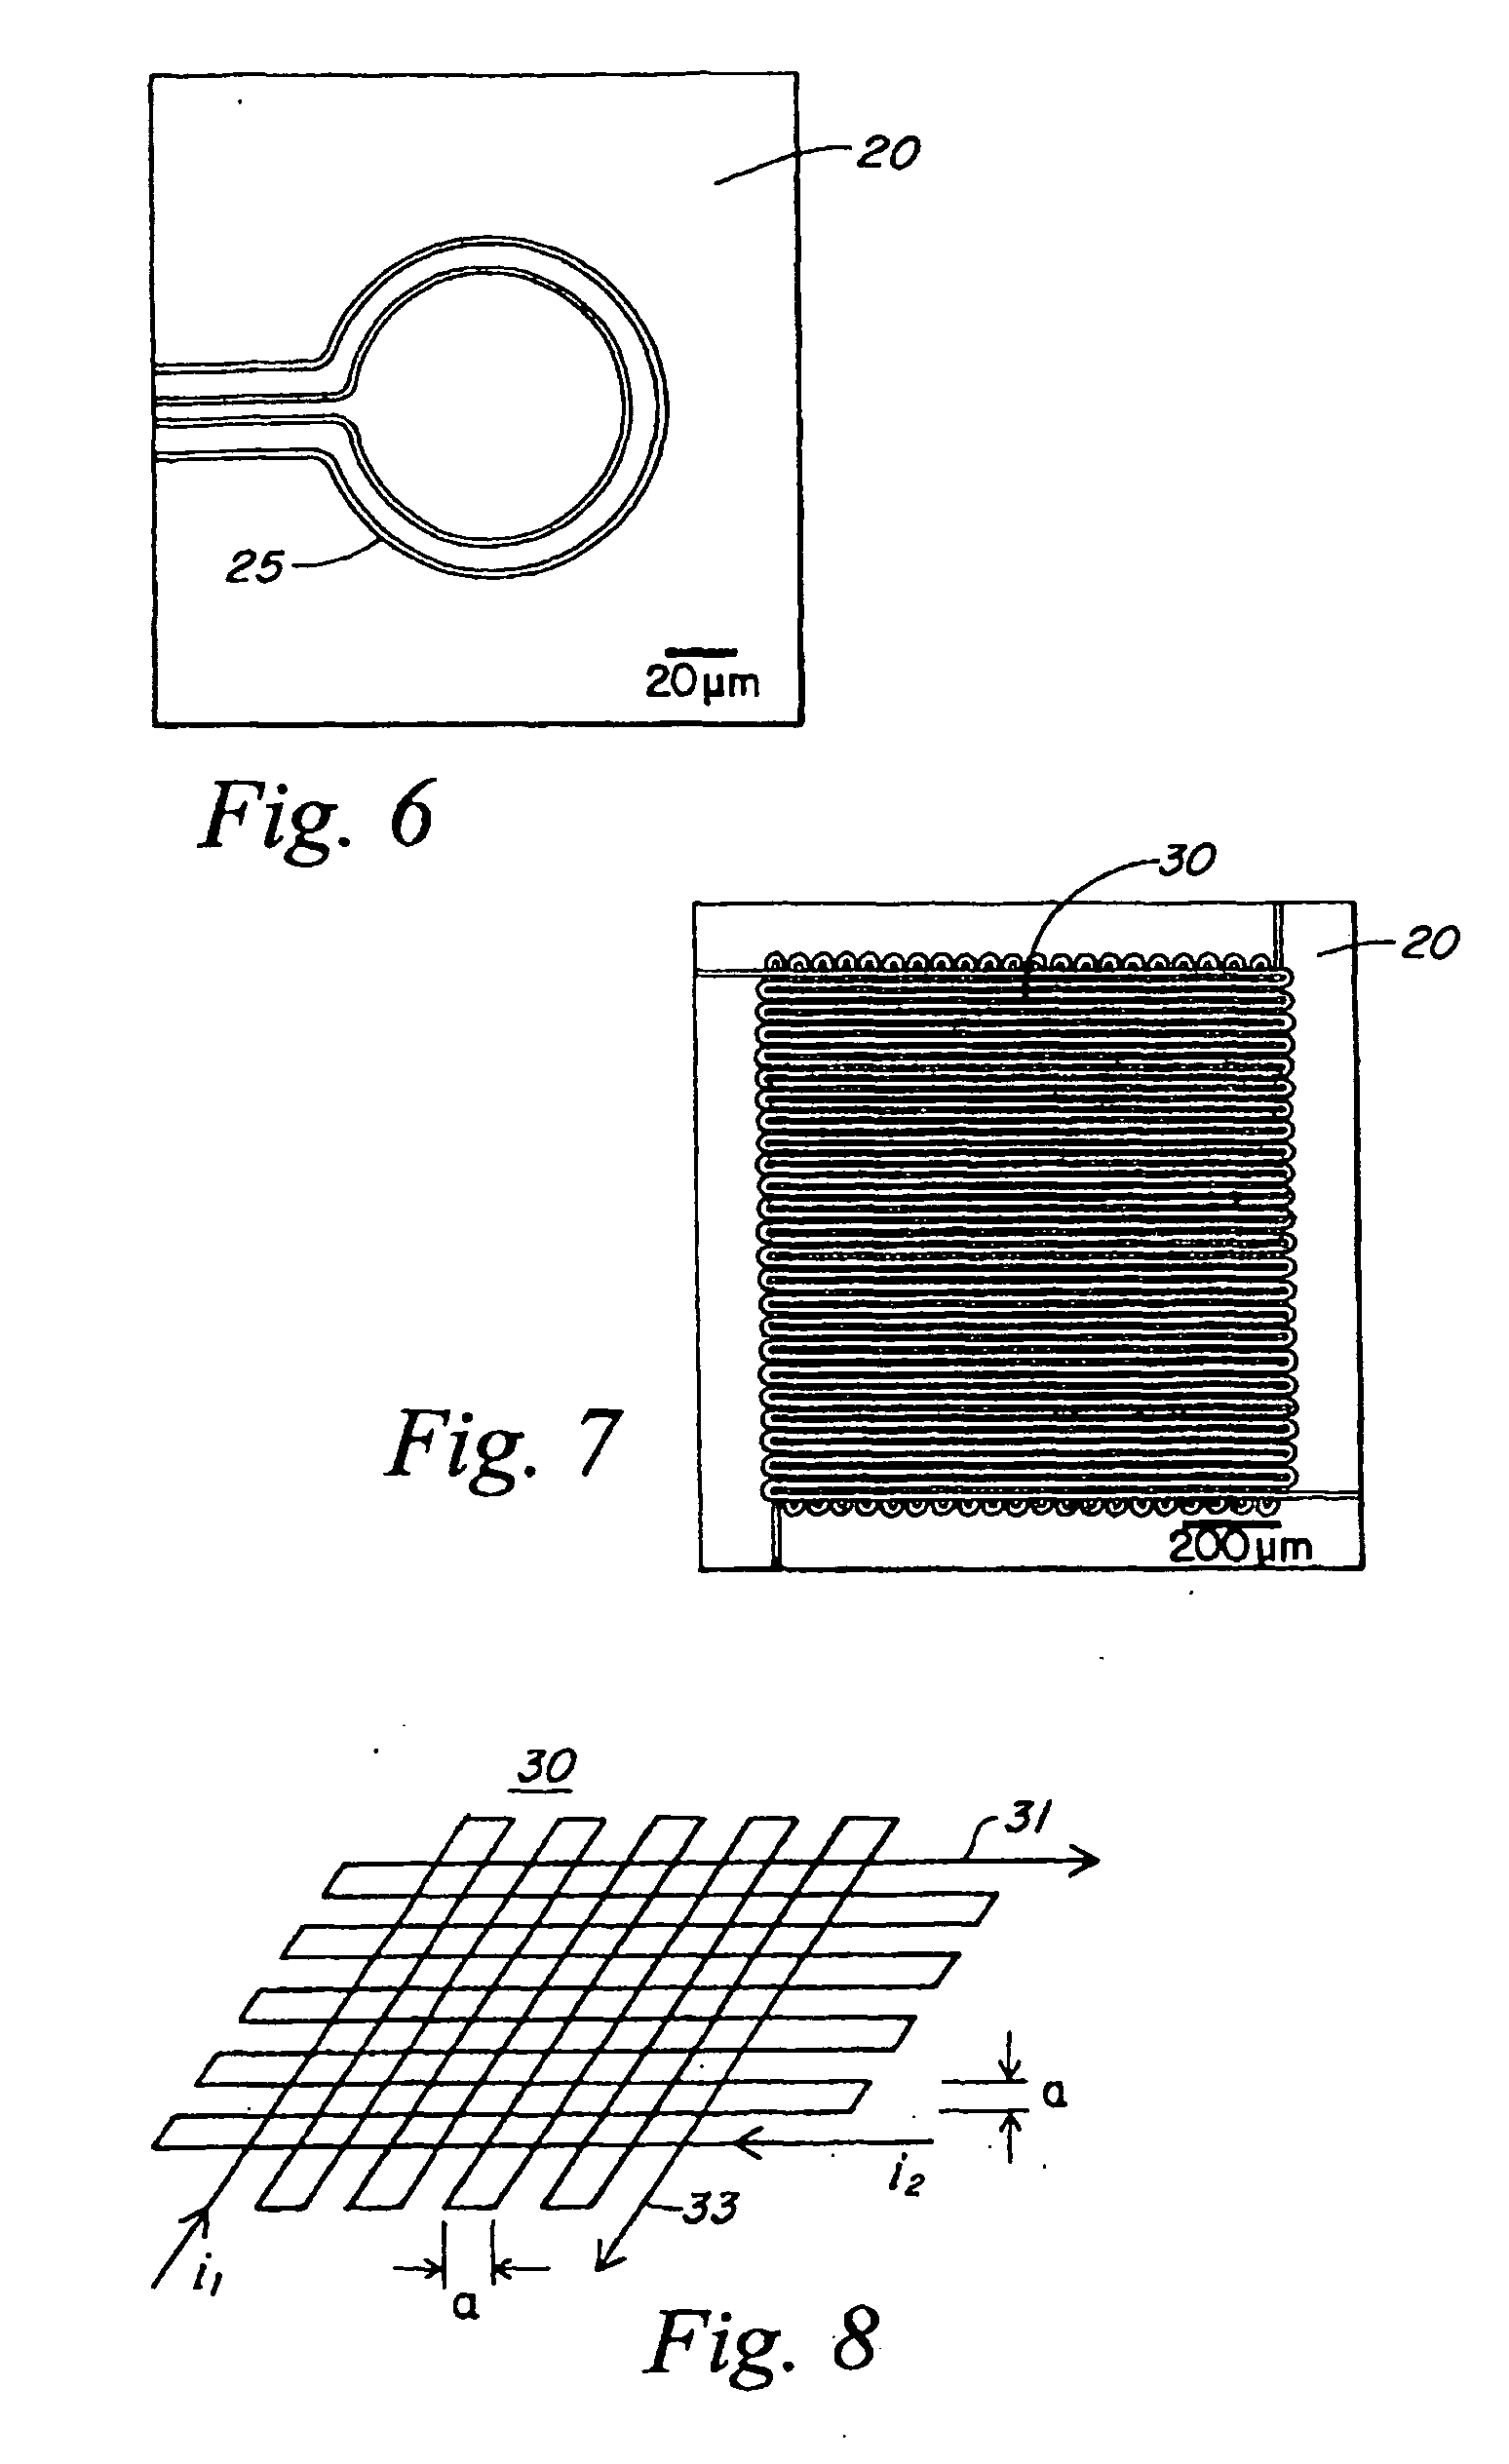 System and method for capturing and positioning particles